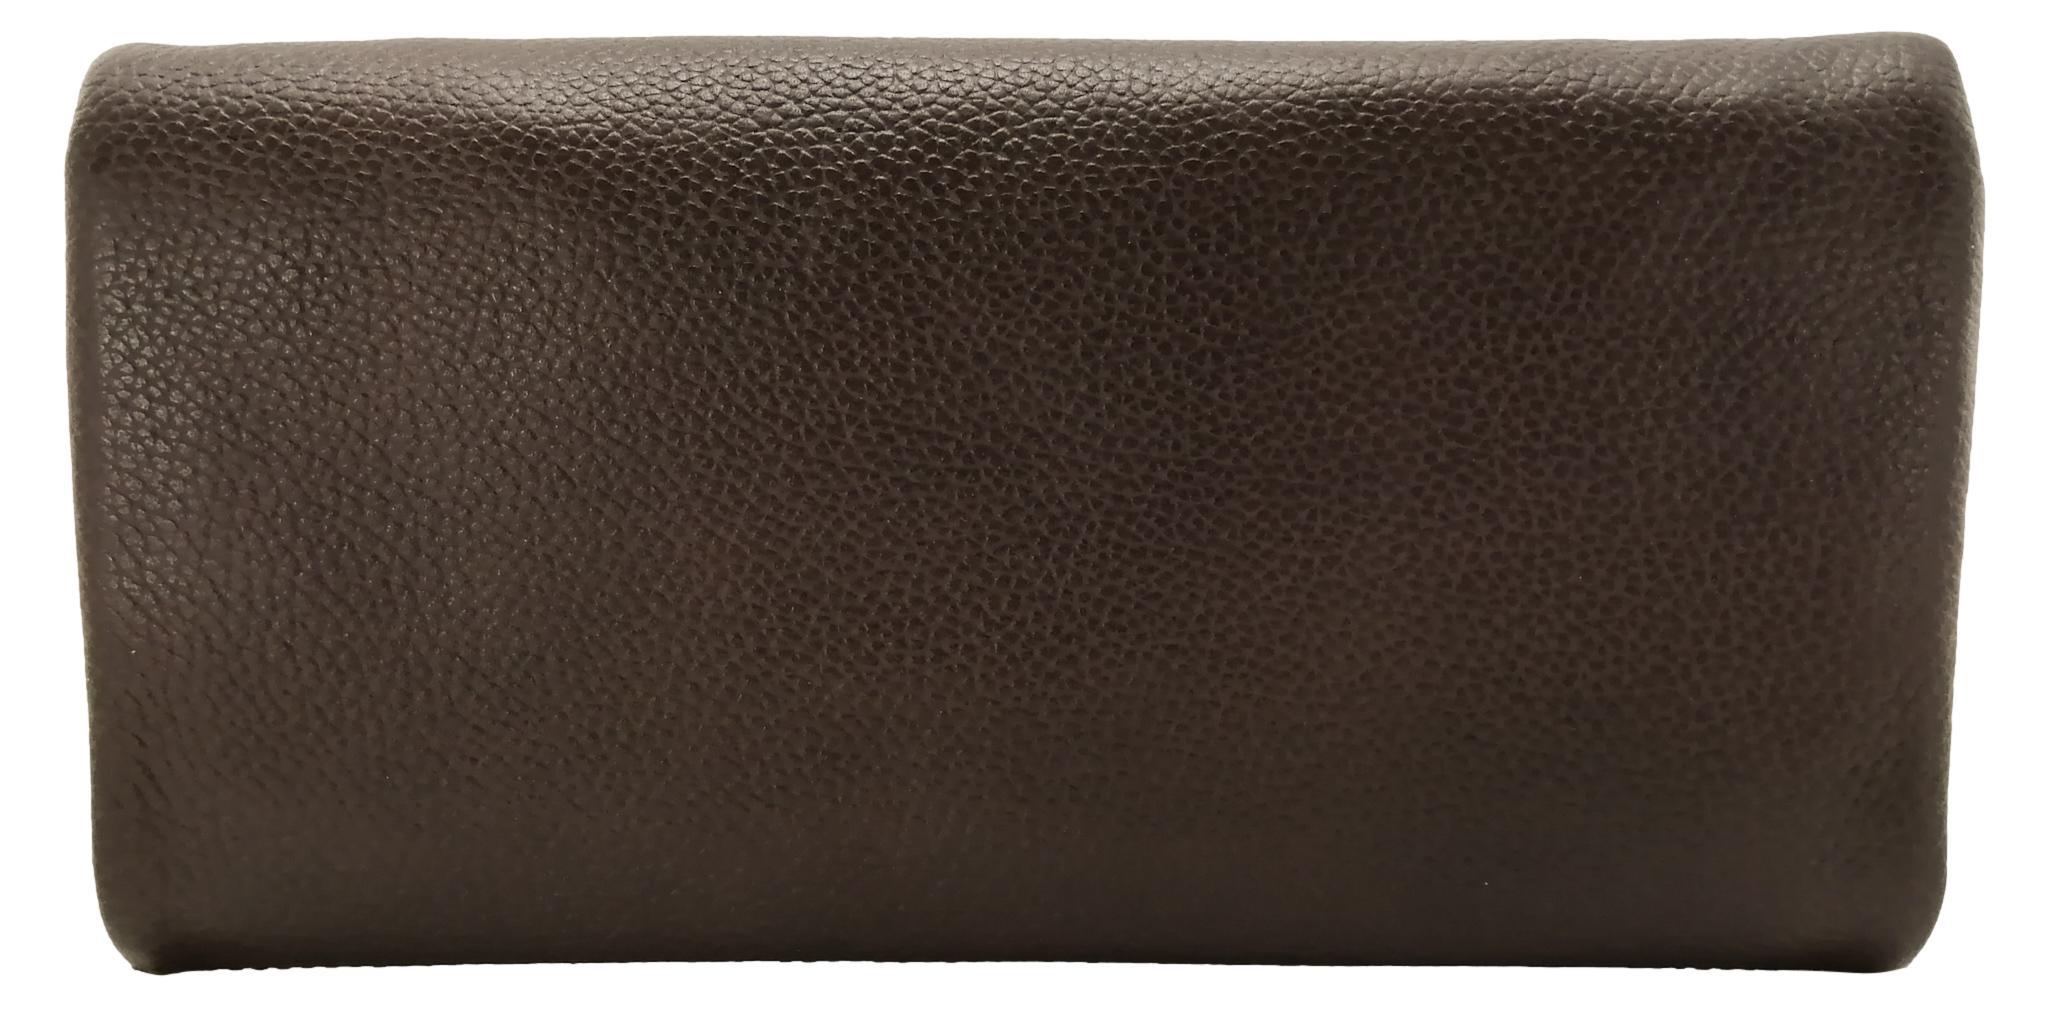 RADLEY London Sandler Way Medium Bifold Purse for Women in Grained Leather,  with Press Stud Fastening, Zipped Coin Pocket & 10 Interior Card Slots,  Chalk, M : Amazon.com.au: Clothing, Shoes & Accessories